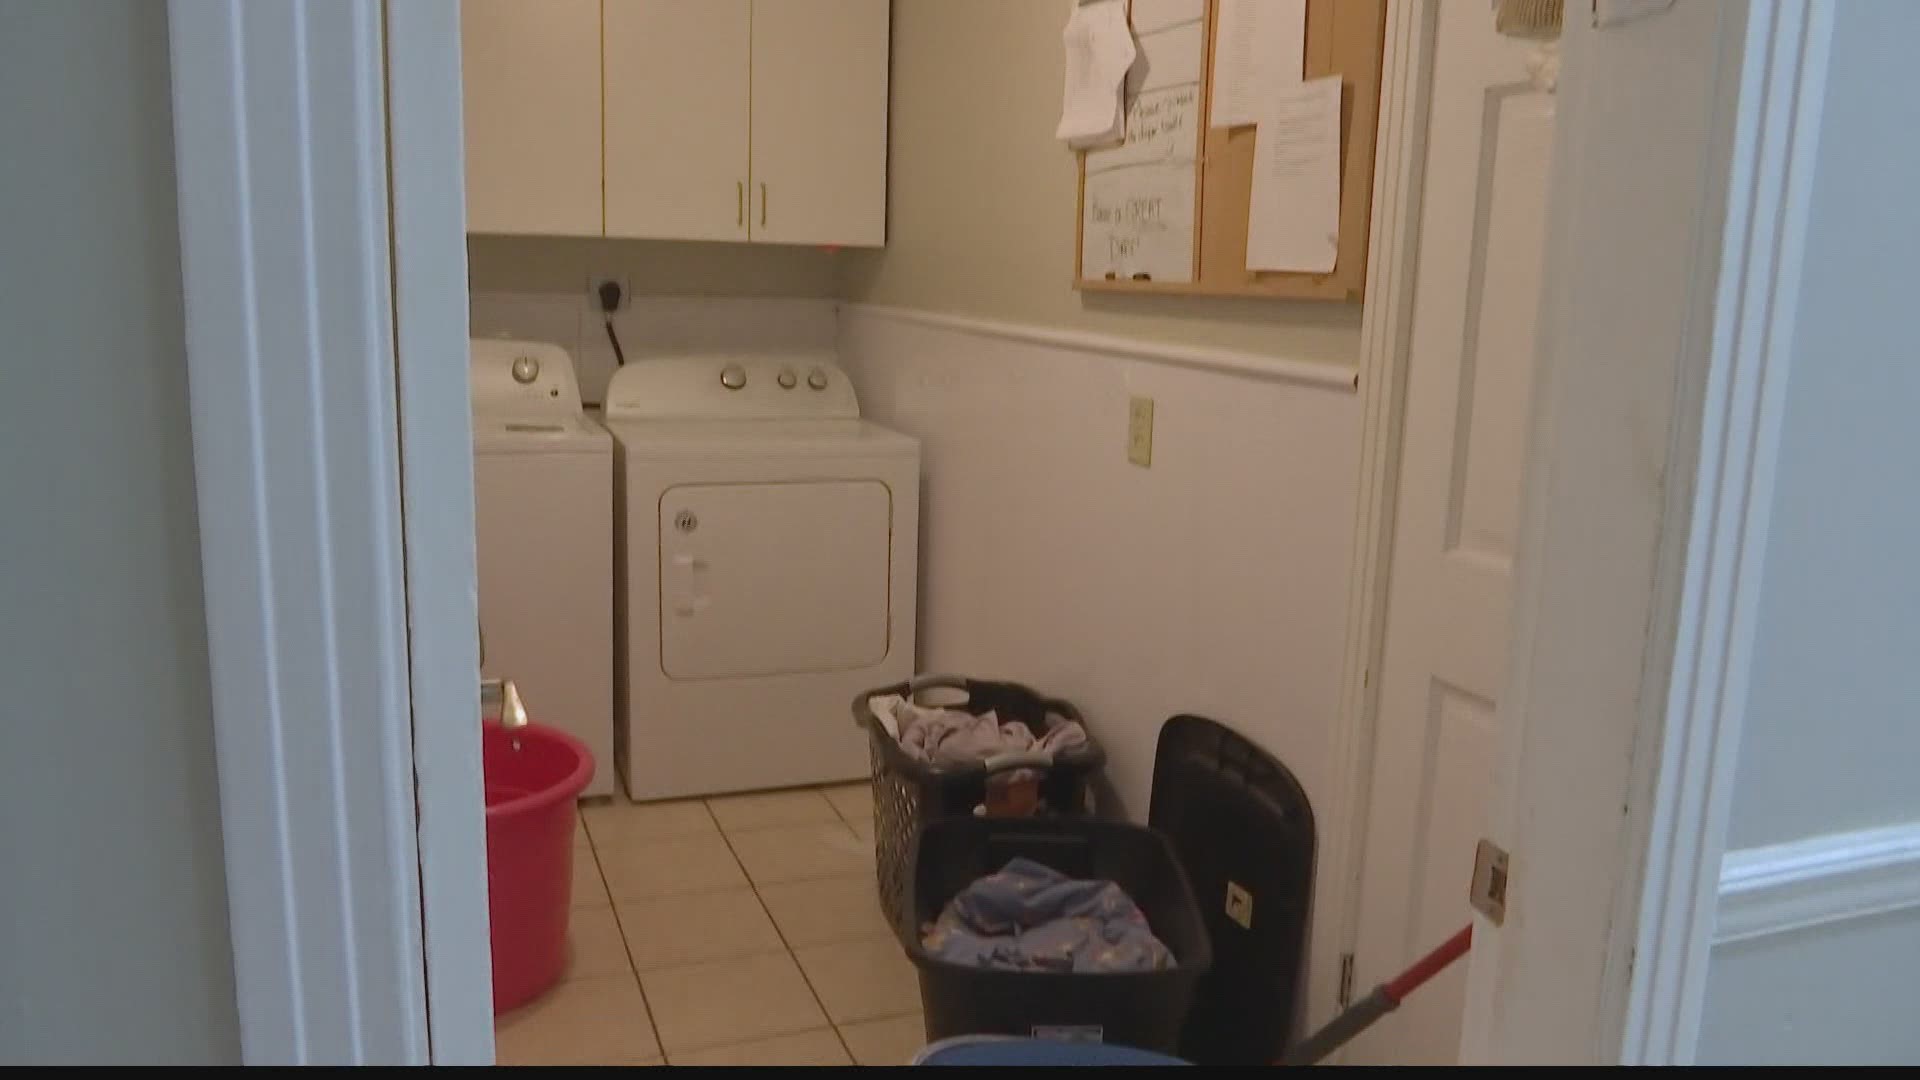 The home for adults with special needs has a goal to raise $100,000 to build a new laundry room for their fifteen residents.